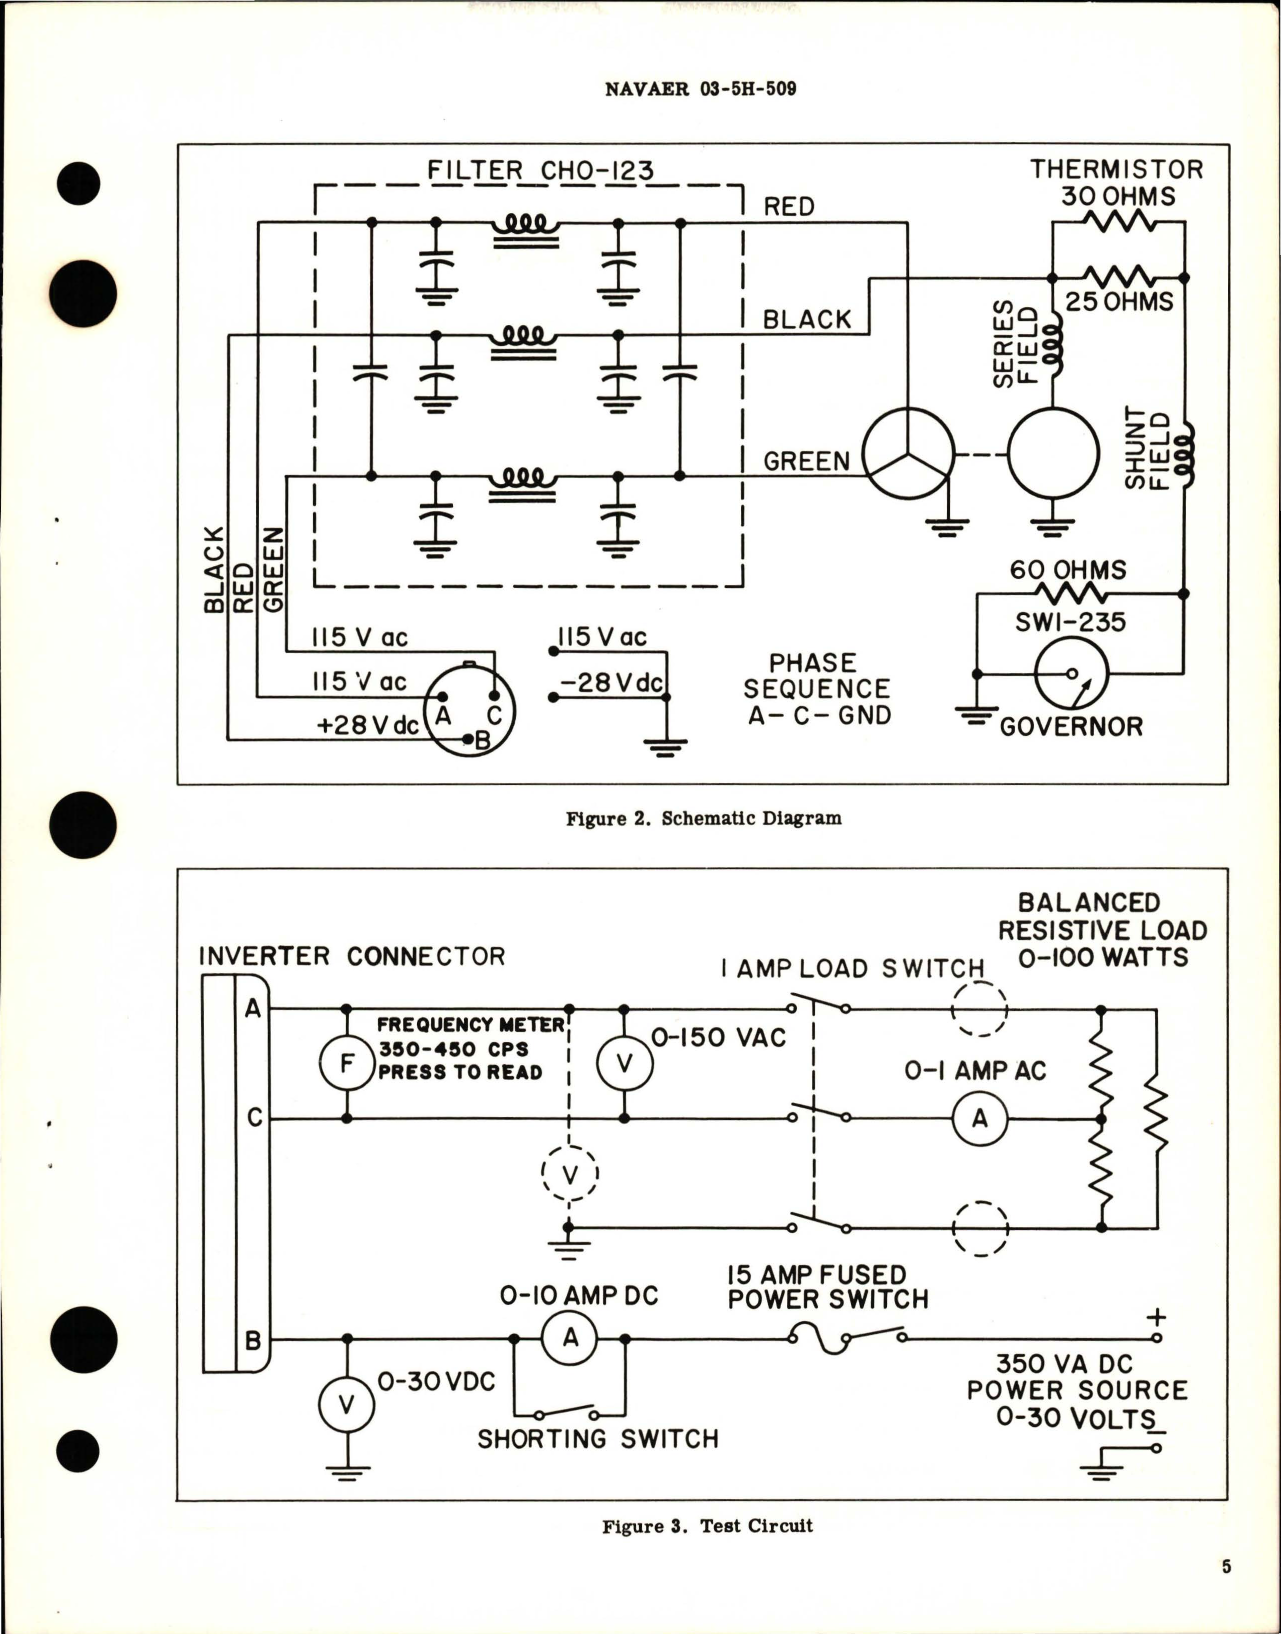 Sample page 5 from AirCorps Library document: Overhaul Instructions with Parts Breakdown for Inverter - 100 VA Three-Phase - Model 1-100A115D6